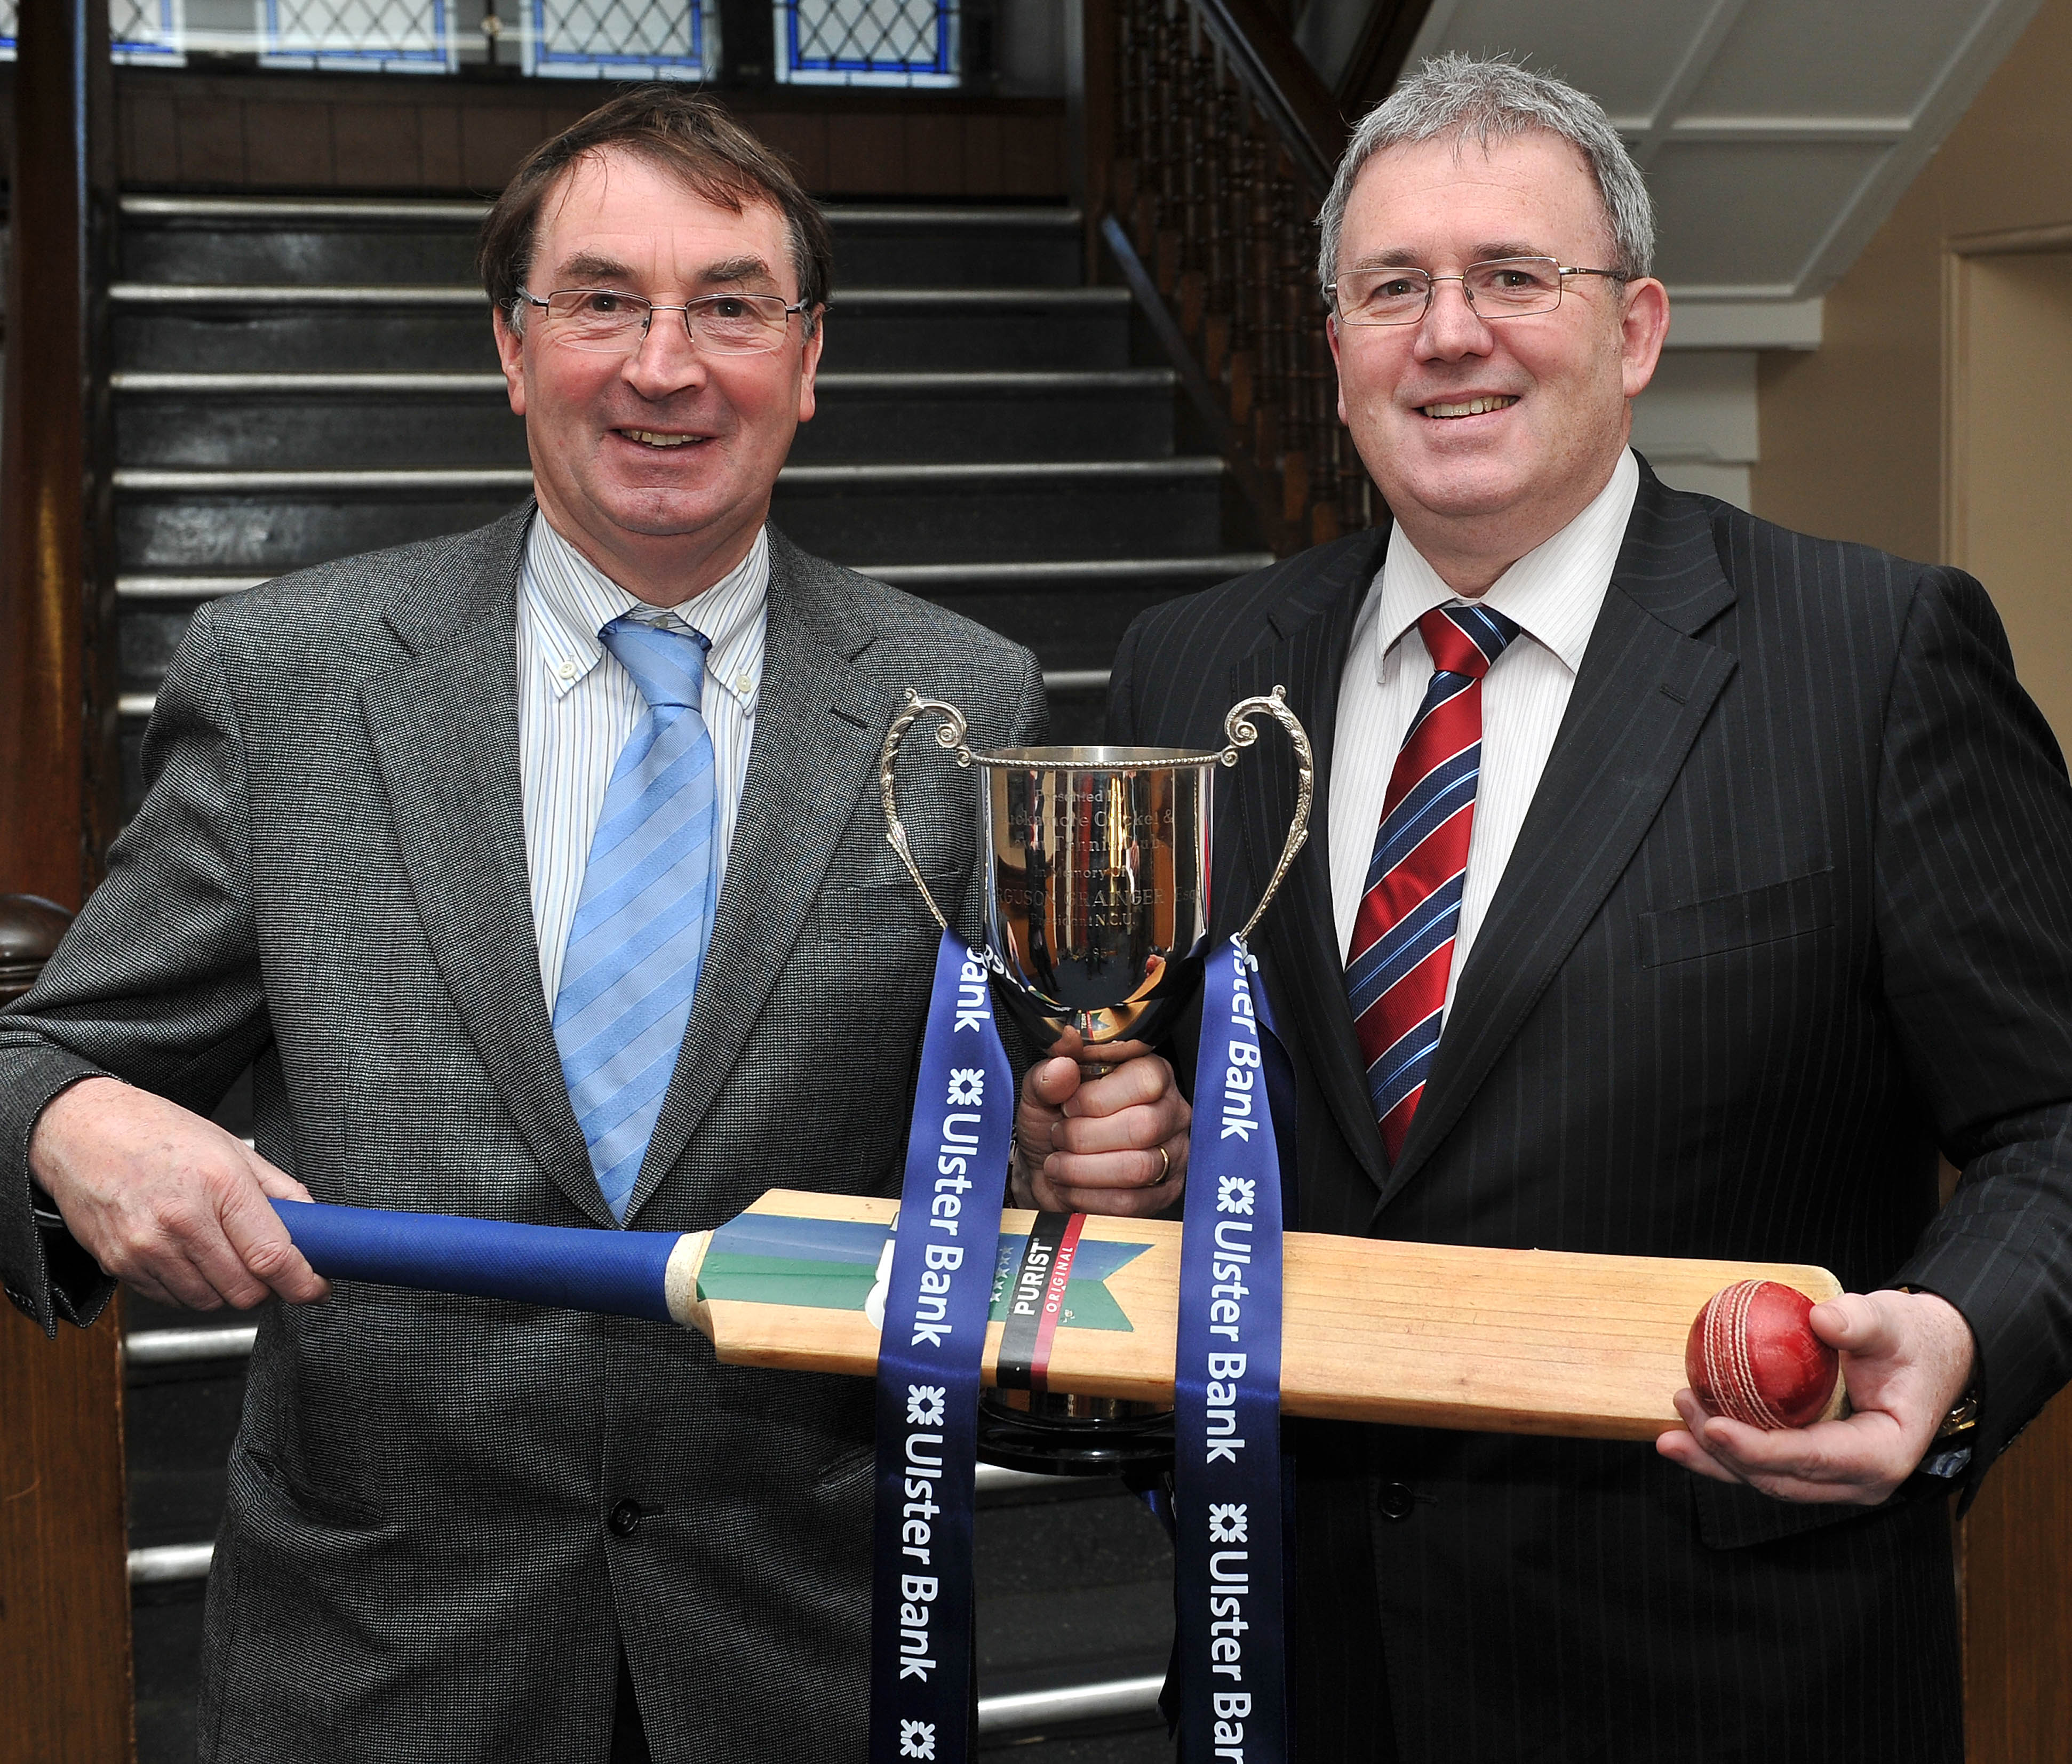 NCU President Chris Harte and Stephen Cruise from the Ulster Bank make the draw for this year's Schools Cup